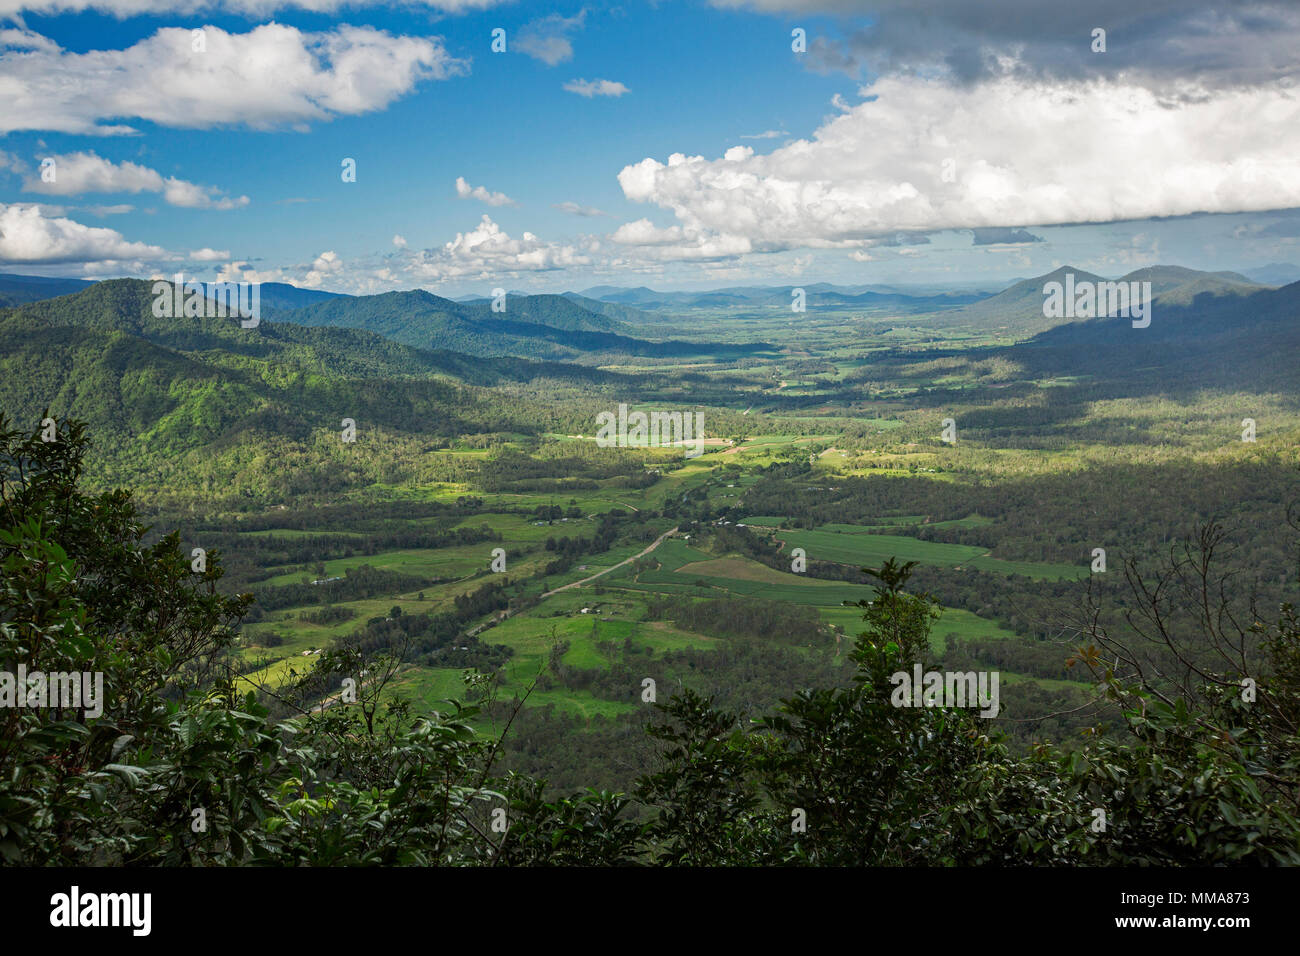 Vast landscape of verdant valley and farmlands hemmed by forested peaks of Great Dividing Range under blue sky in northern Queensland Australia Stock Photo